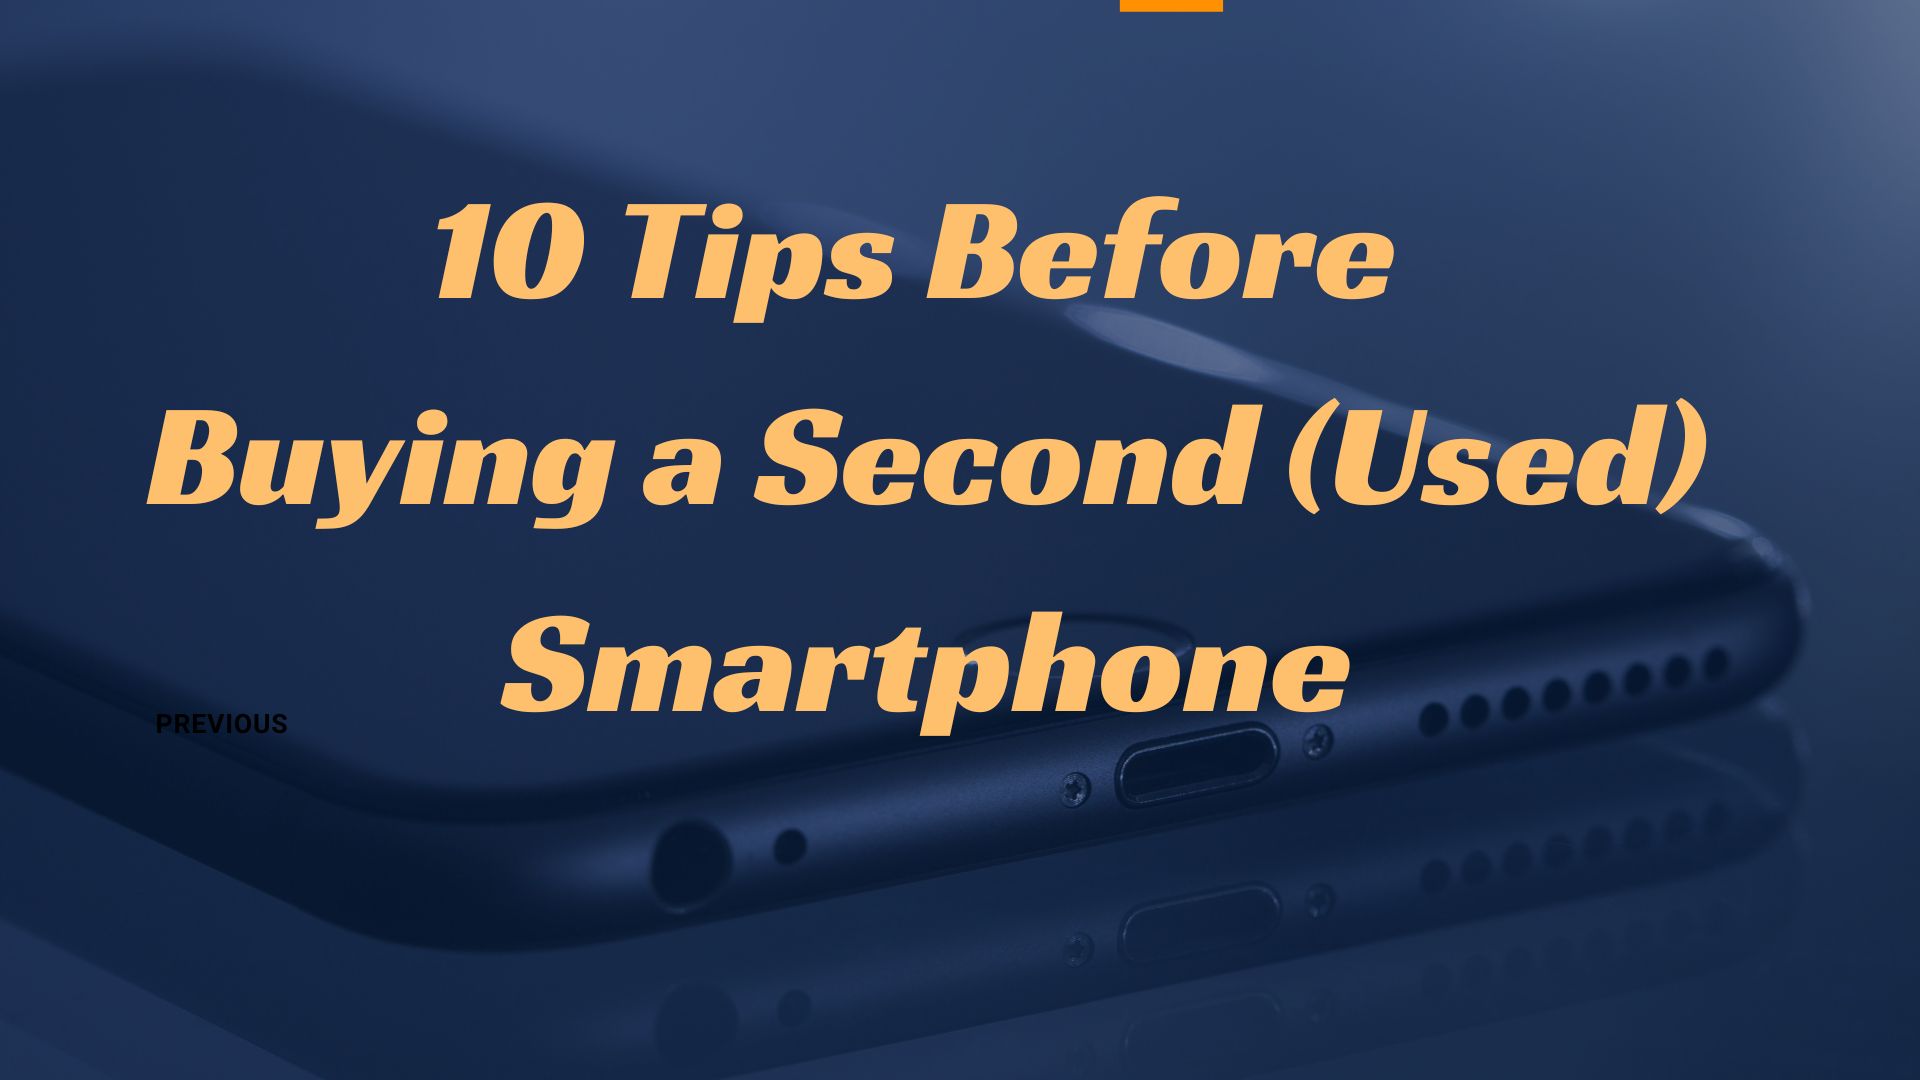 10 Tips Before Buying a Second (Used) Smartphone